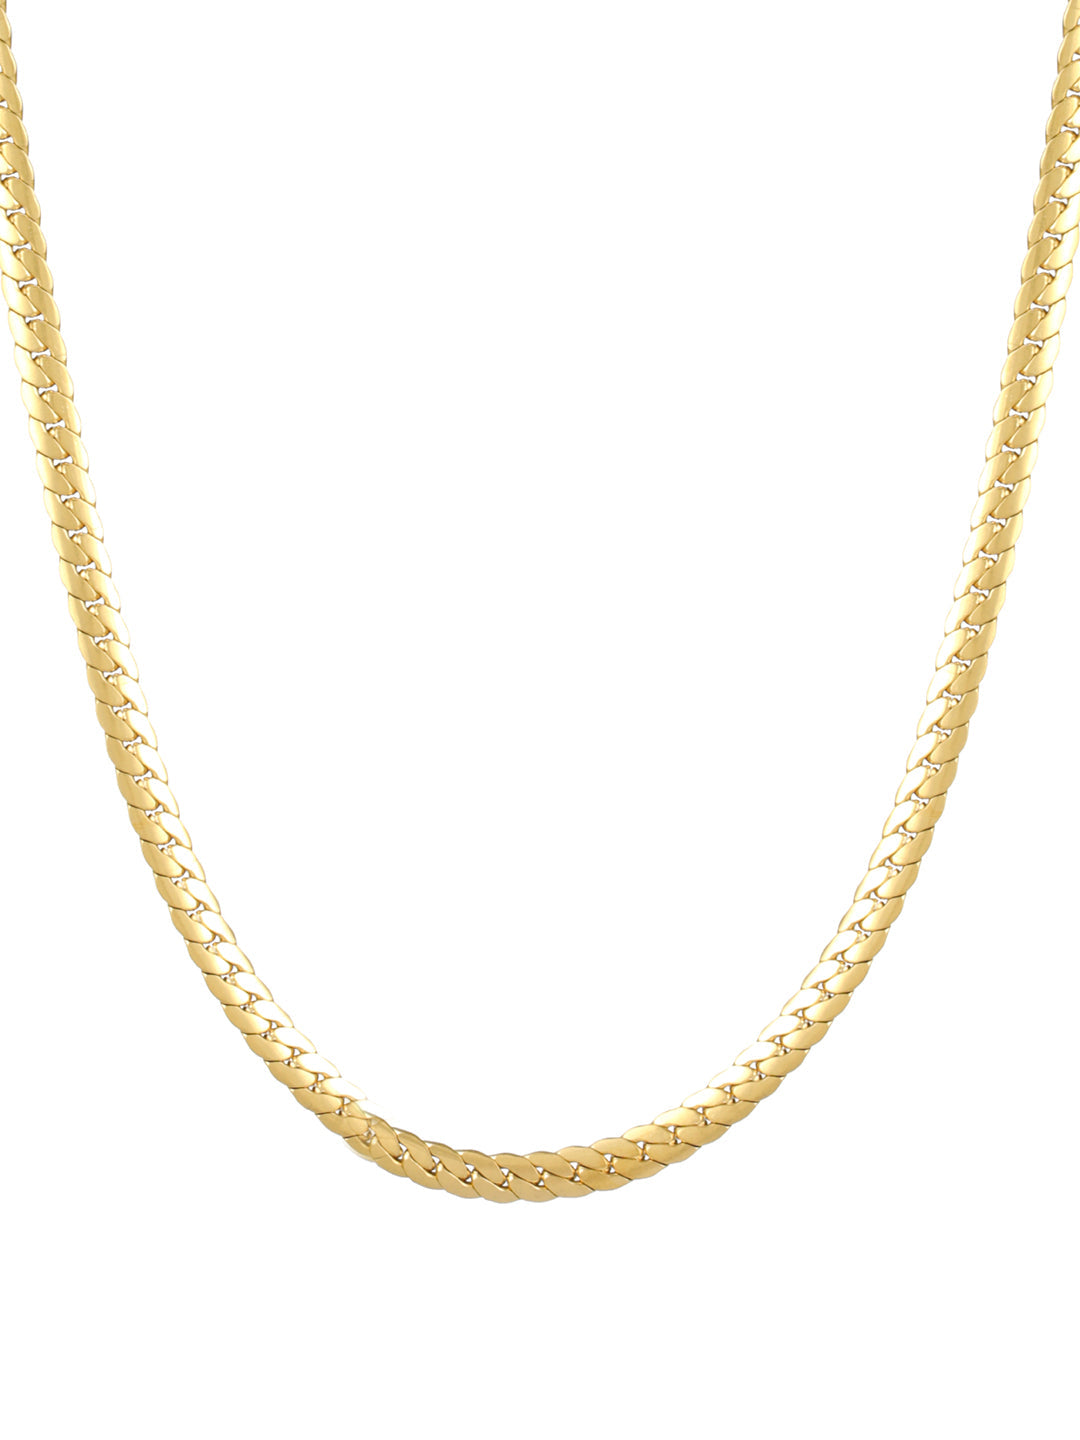 Men's Classic Gold-Plated Link Chain for Men - Priyaasi